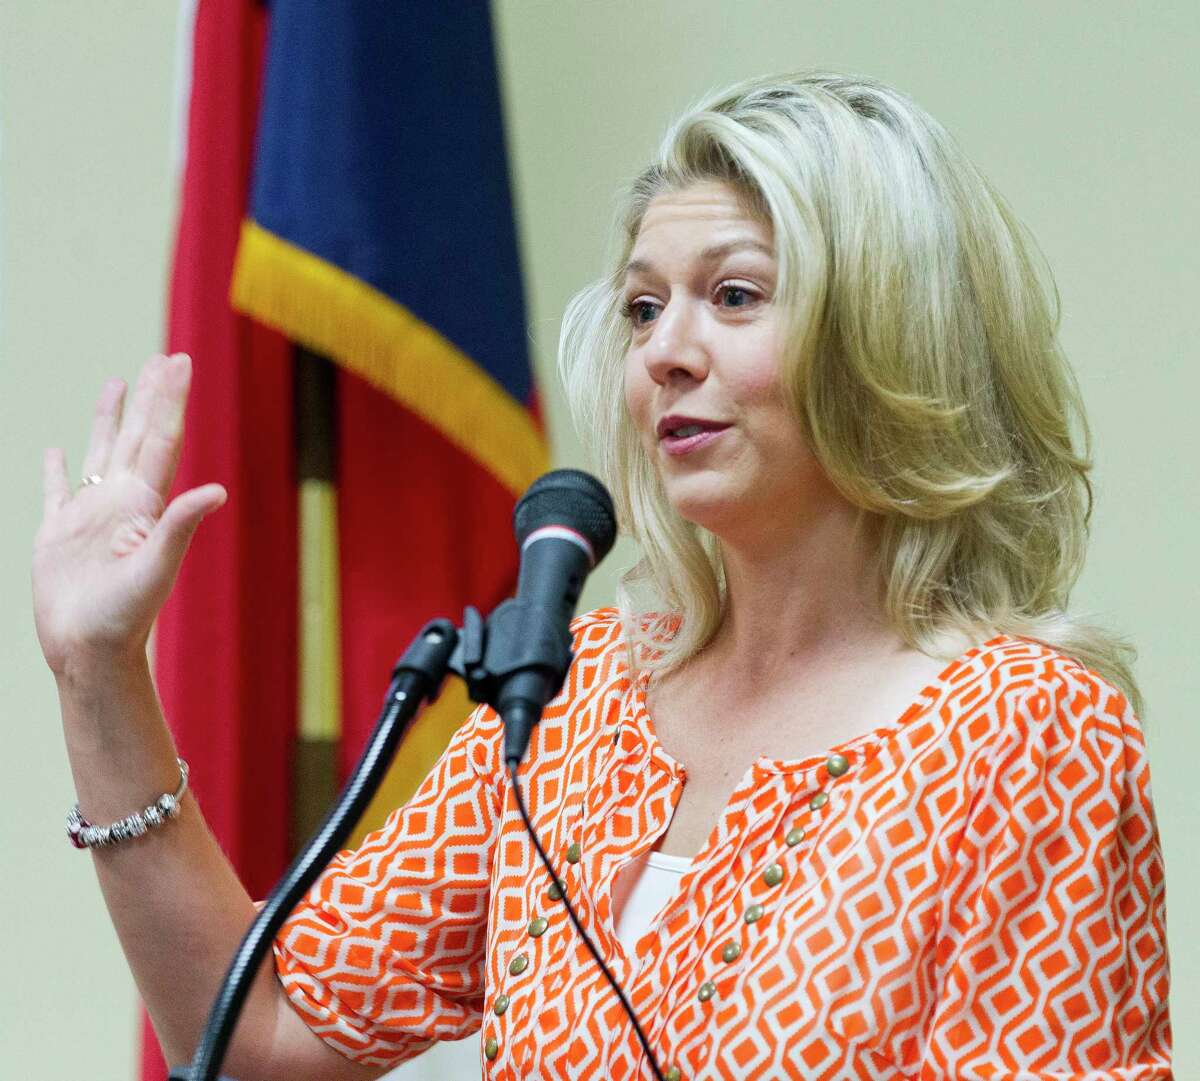 Laura Fillault, incumbent for Position 7 with The Woodlands Township Board of Directors, speaks during a Texas Patriots PAC meeting, Tuesday, Sept. 19, 2017, in The Woodlands.